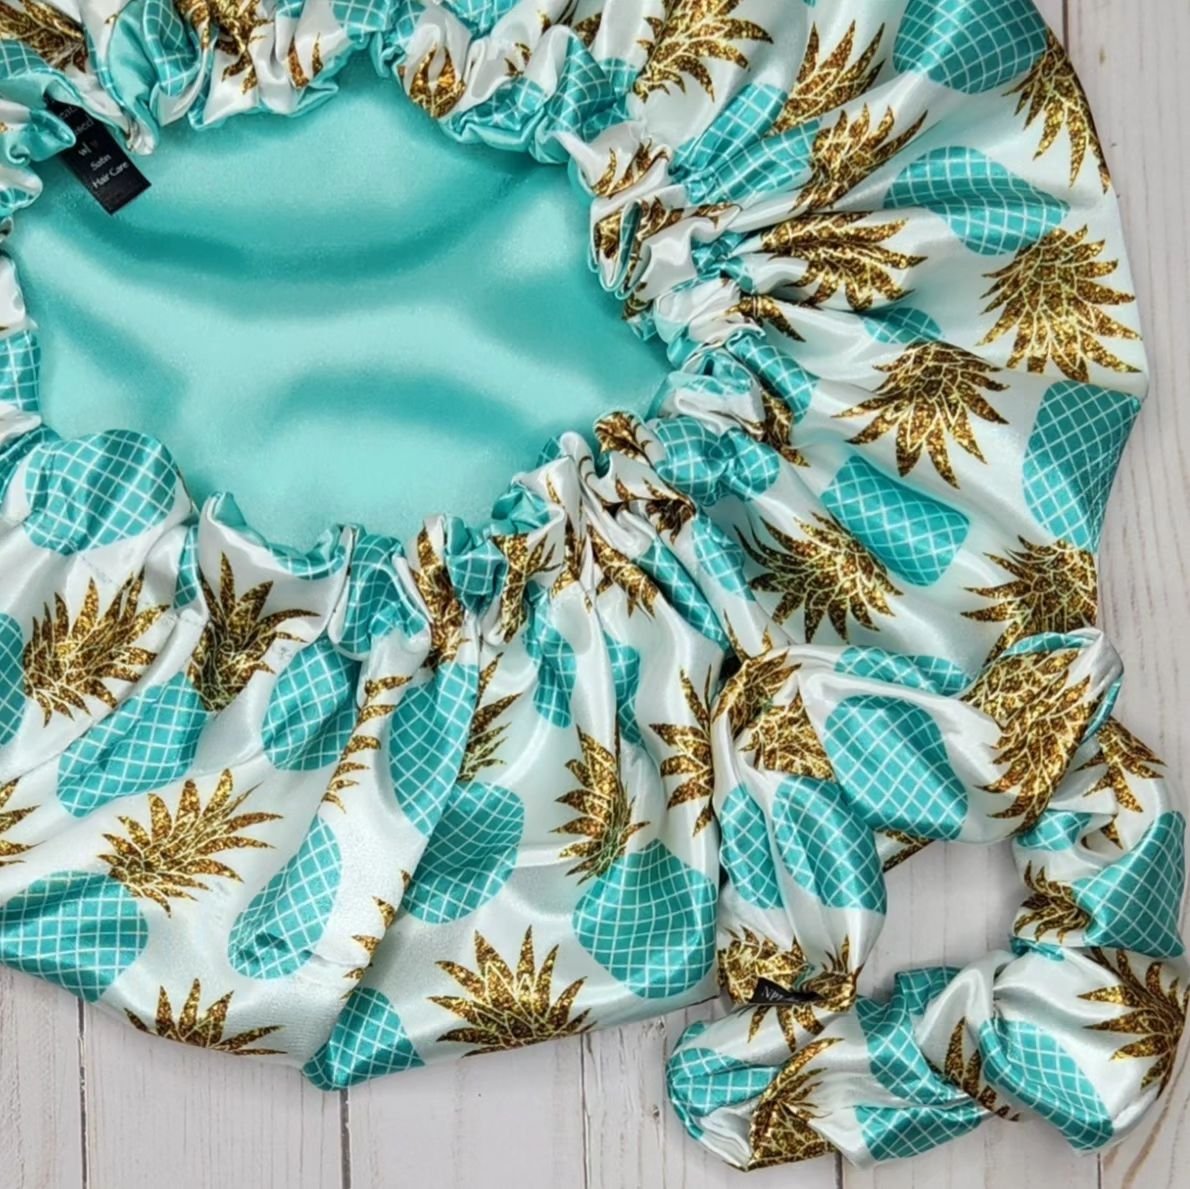 NEW 🍍 NEW 🍍 NEW our newest print bonnet is now available, exclusively at #NPTressTreats